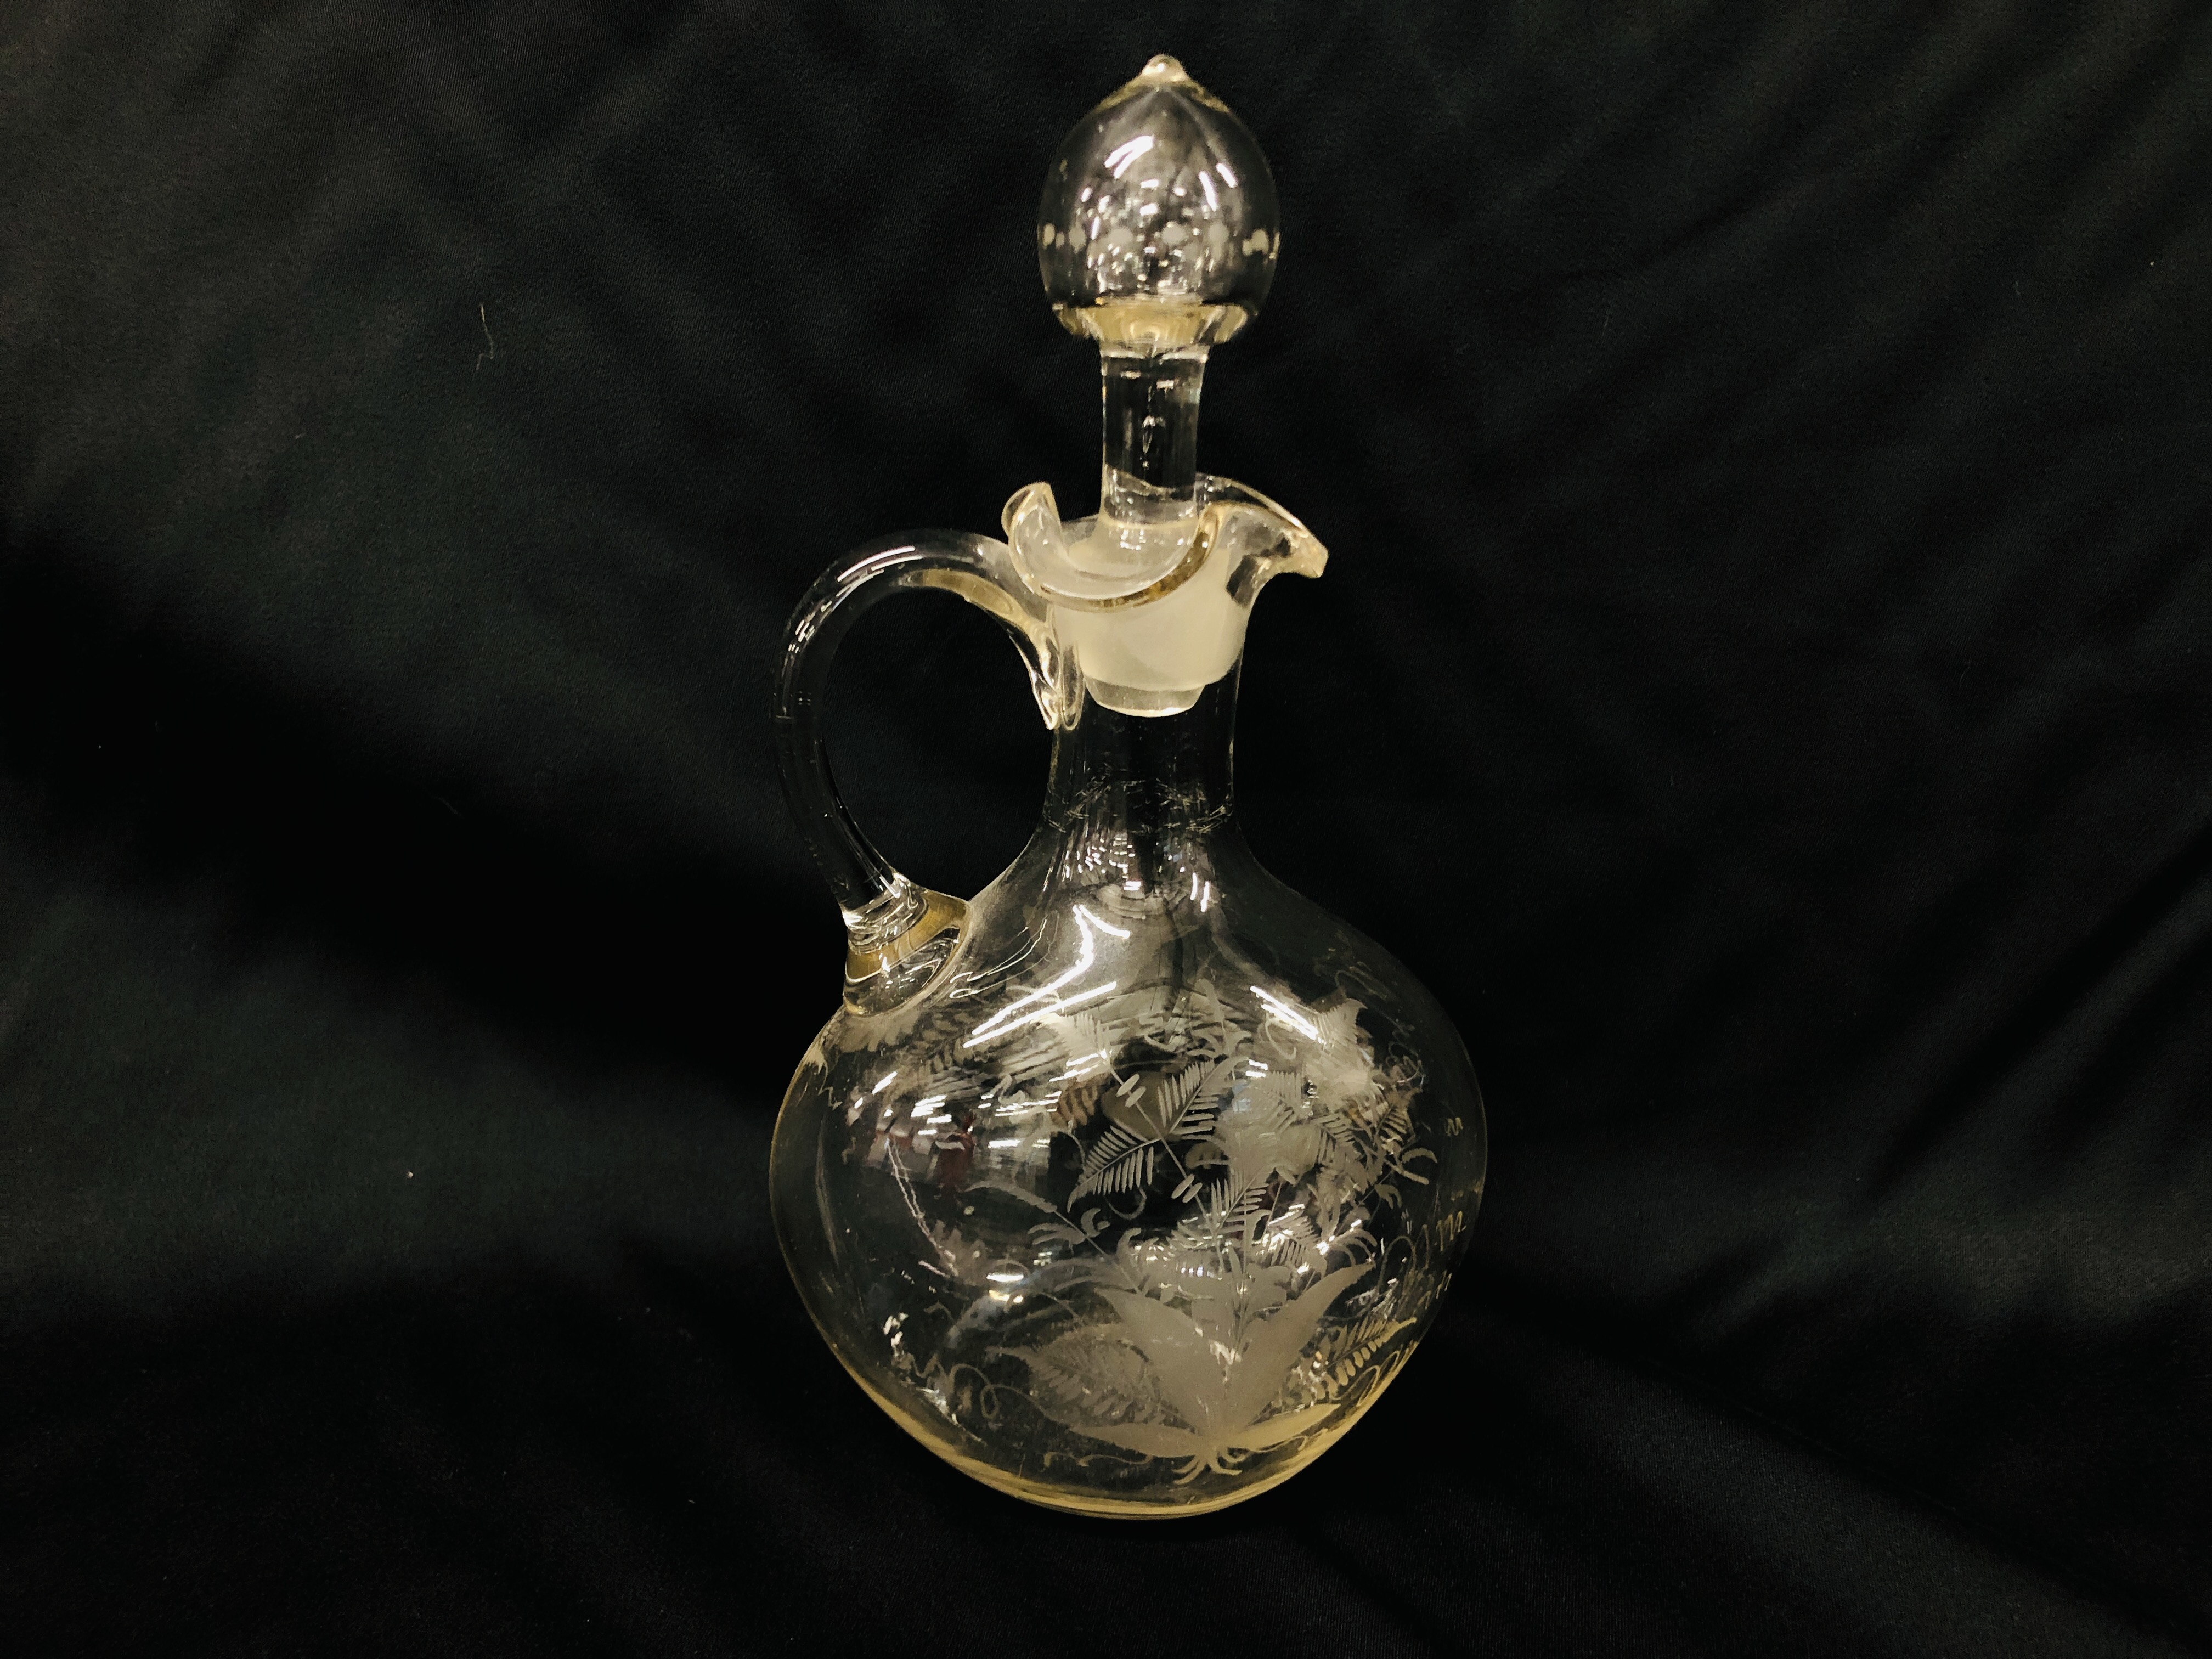 MARY GREGORY CRANBERRY VASE, VINTAGE CLEAR GLASS DECANTER WITH ETCHED FERN AND BIRD DESIGN. - Image 6 of 10